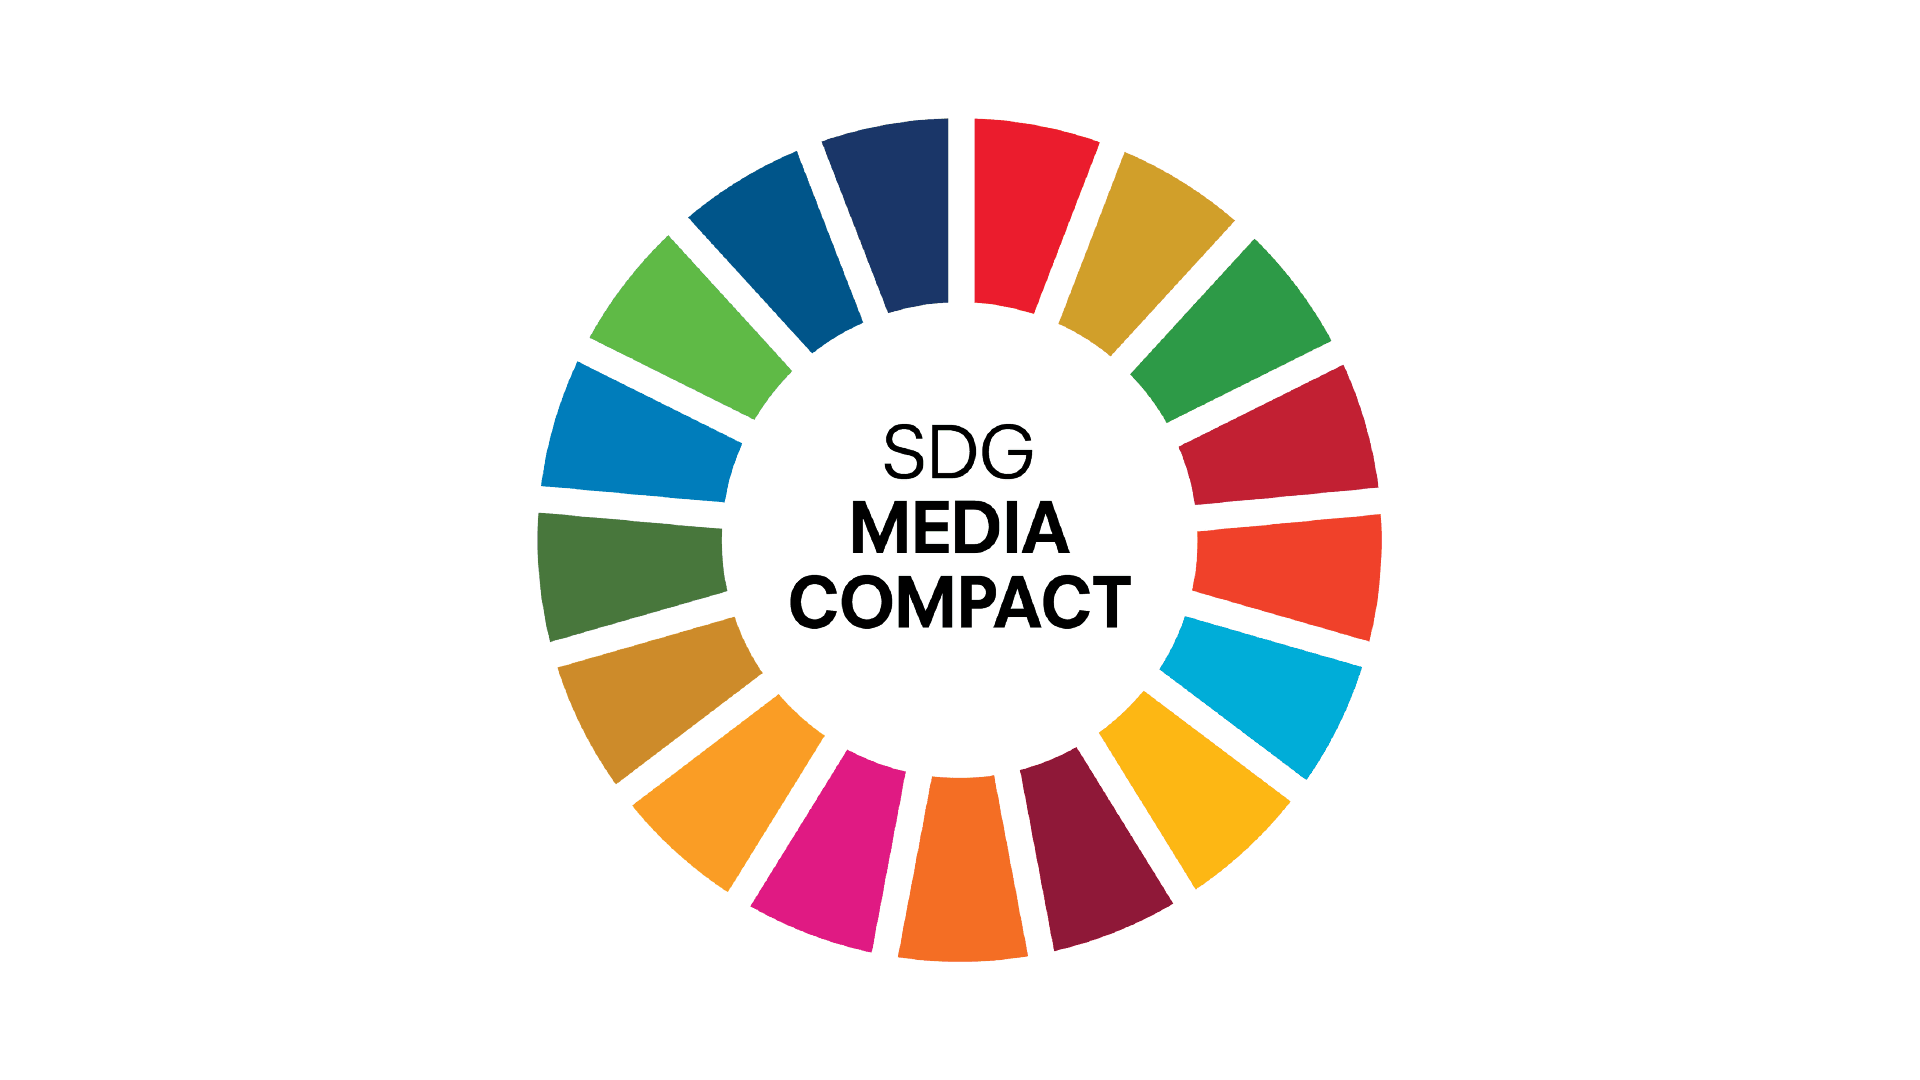 'Joining the SDG Media Compact' logo